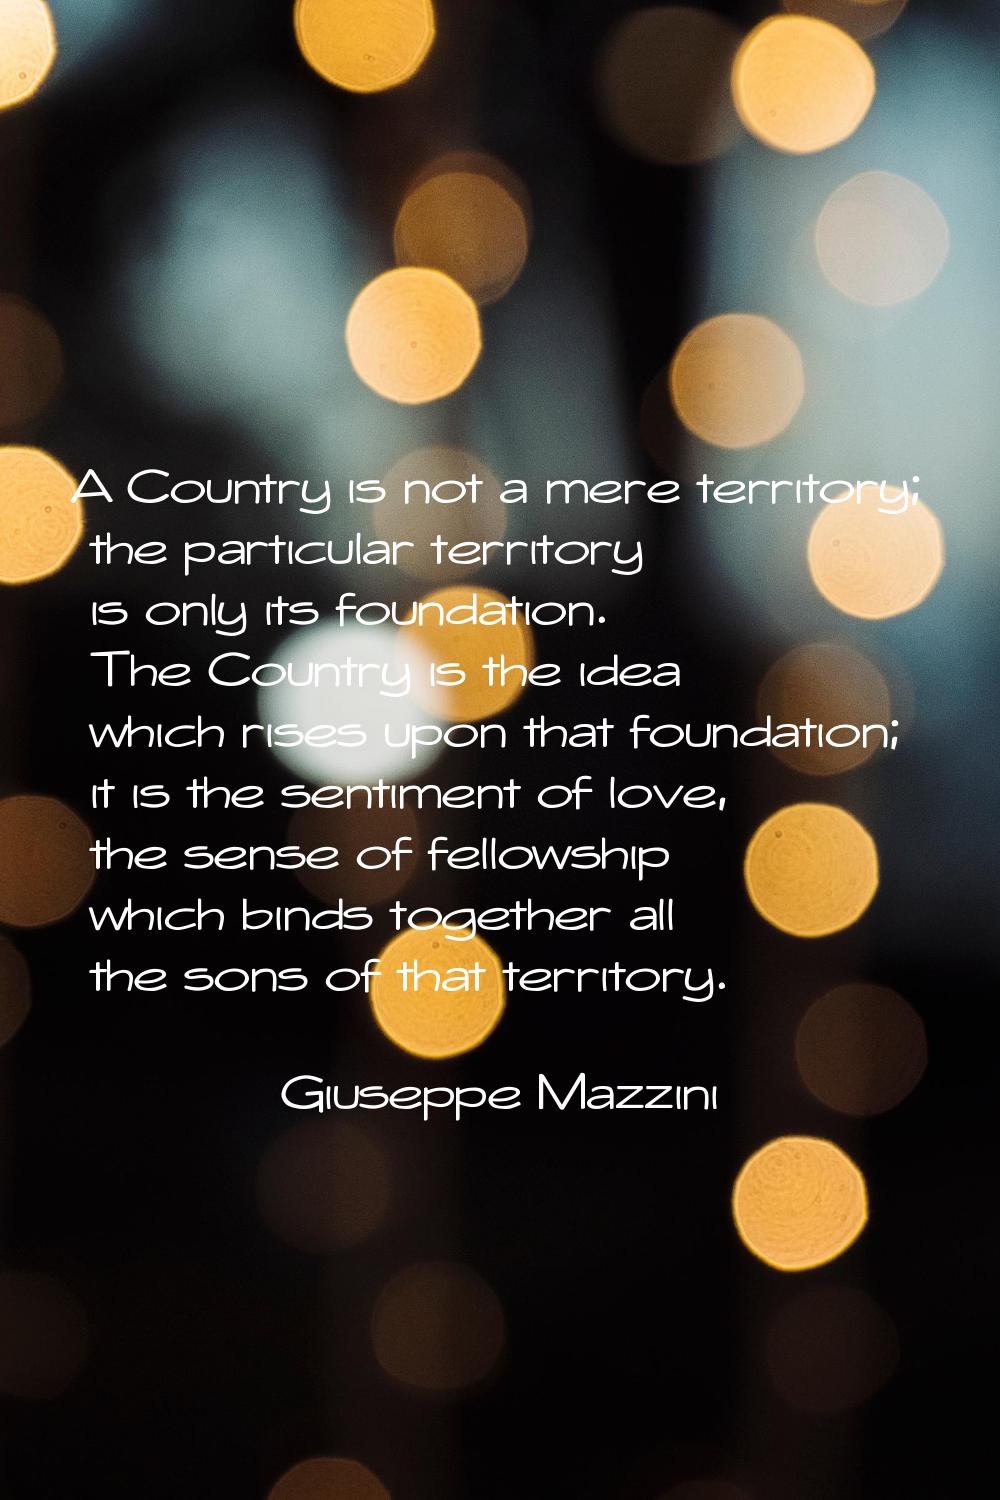 A Country is not a mere territory; the particular territory is only its foundation. The Country is 